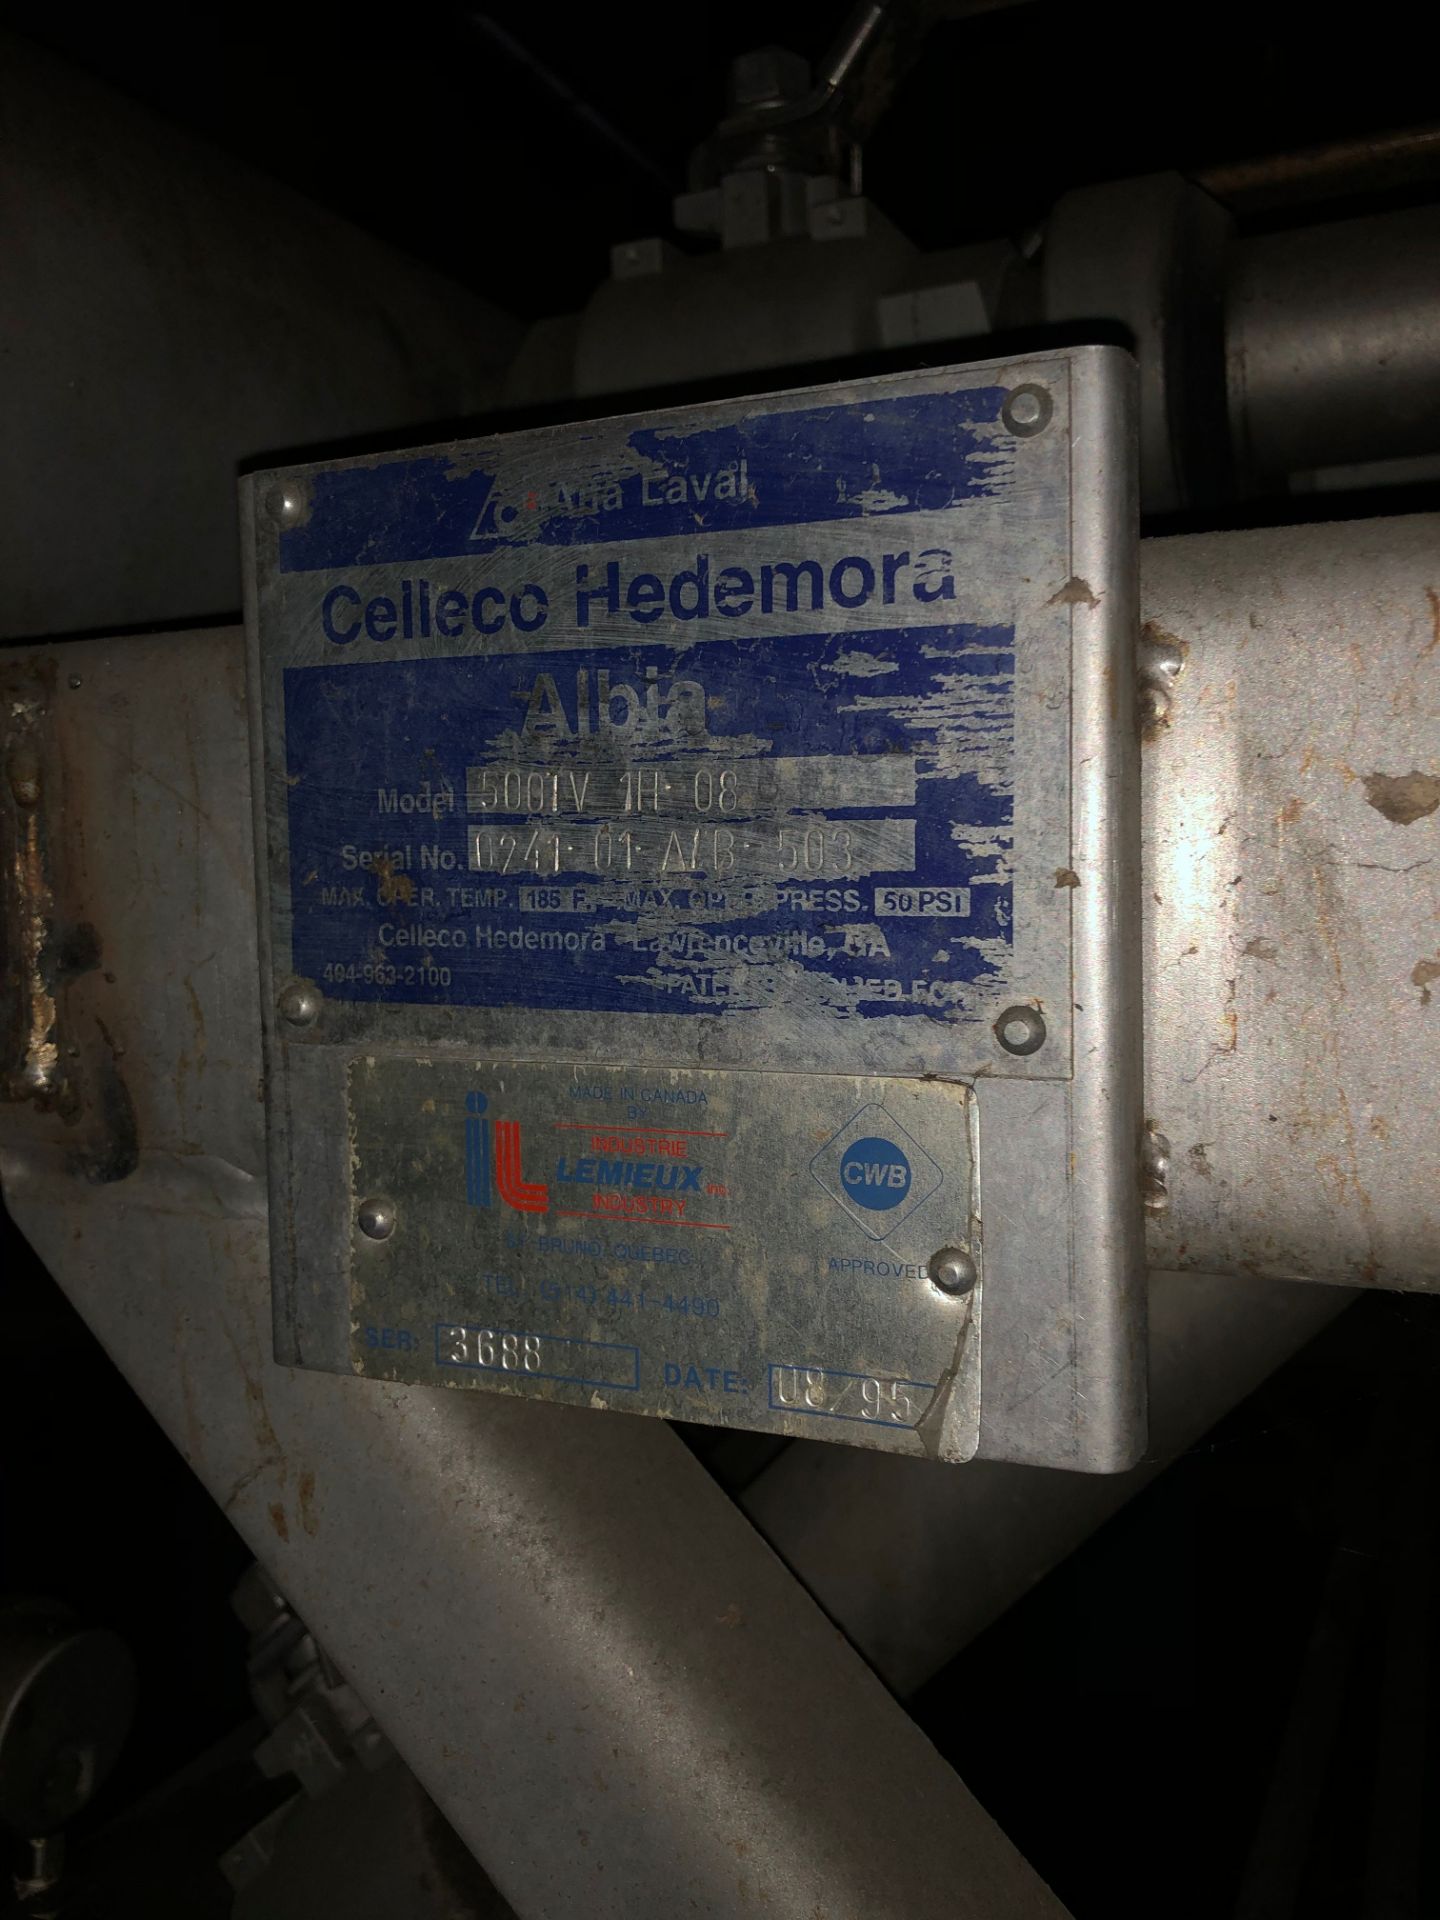 Stock Cleaner Celleco Hedemora - Albia - Image 3 of 3